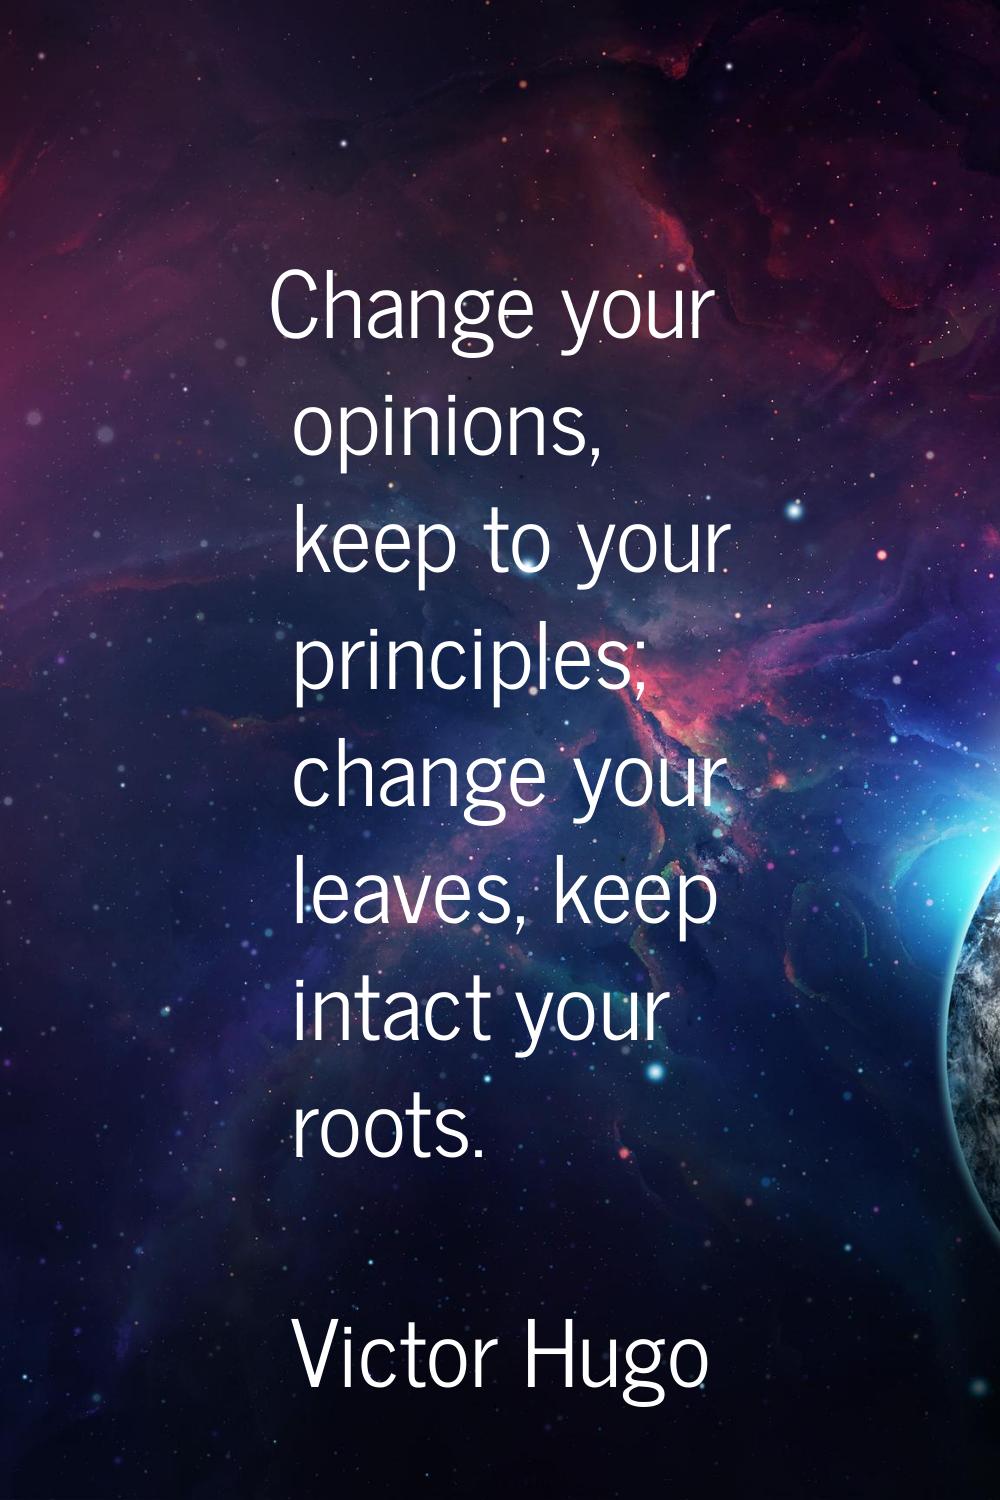 Change your opinions, keep to your principles; change your leaves, keep intact your roots.